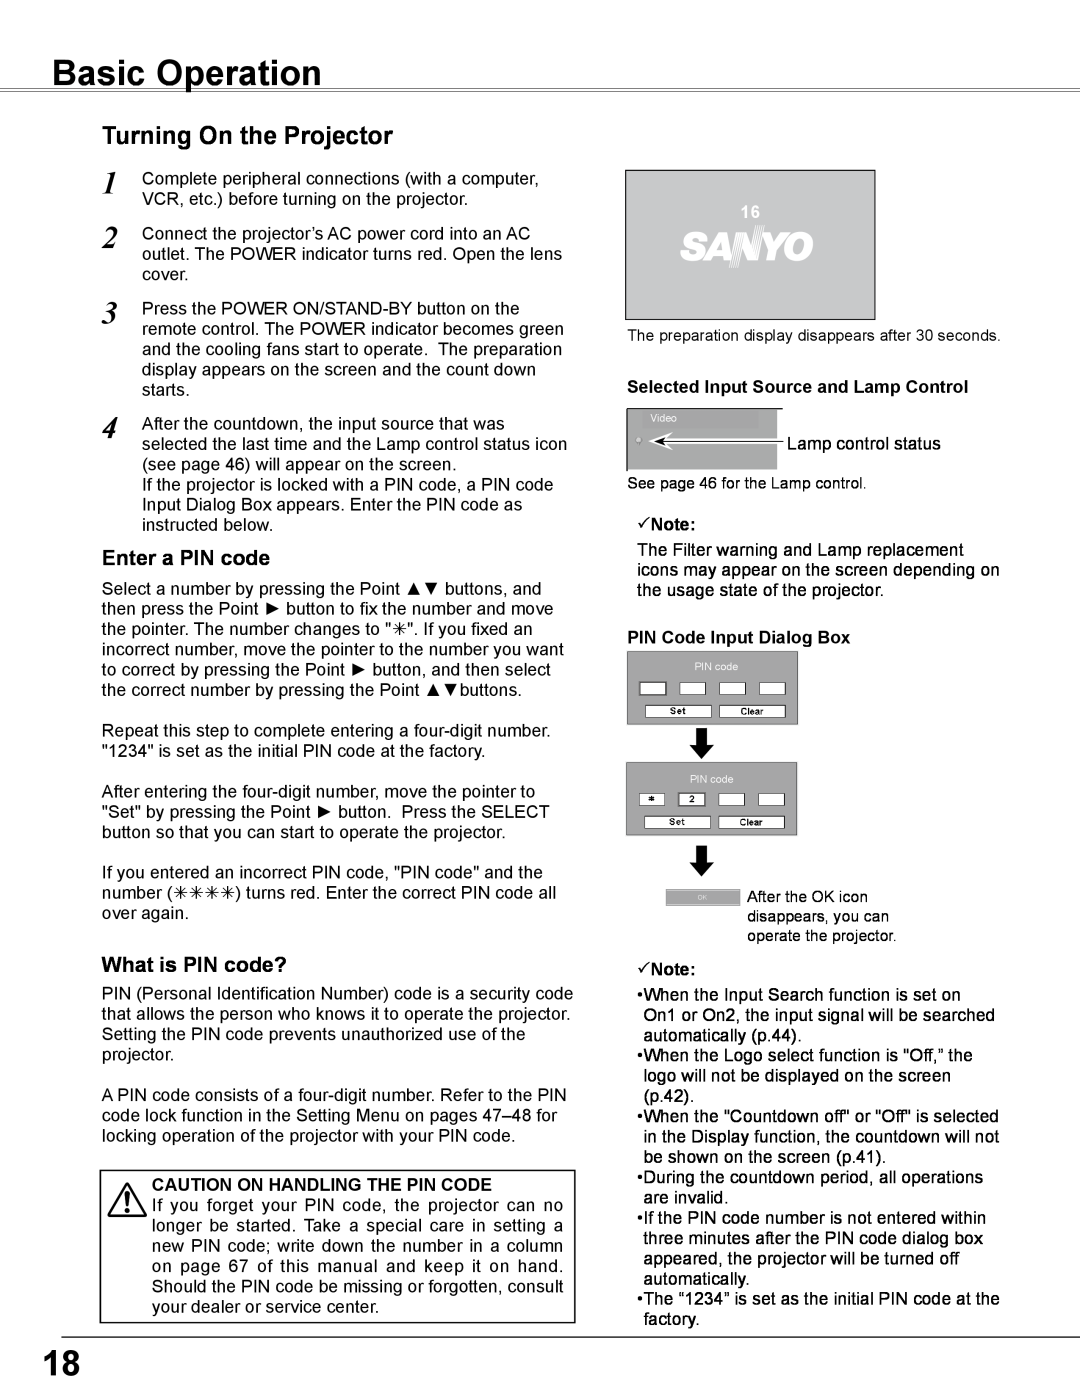 Sanyo PLC-WXL46 owner manual Basic Operation, Turning On the Projector, Enter a PIN code, What is PIN code?, Note 